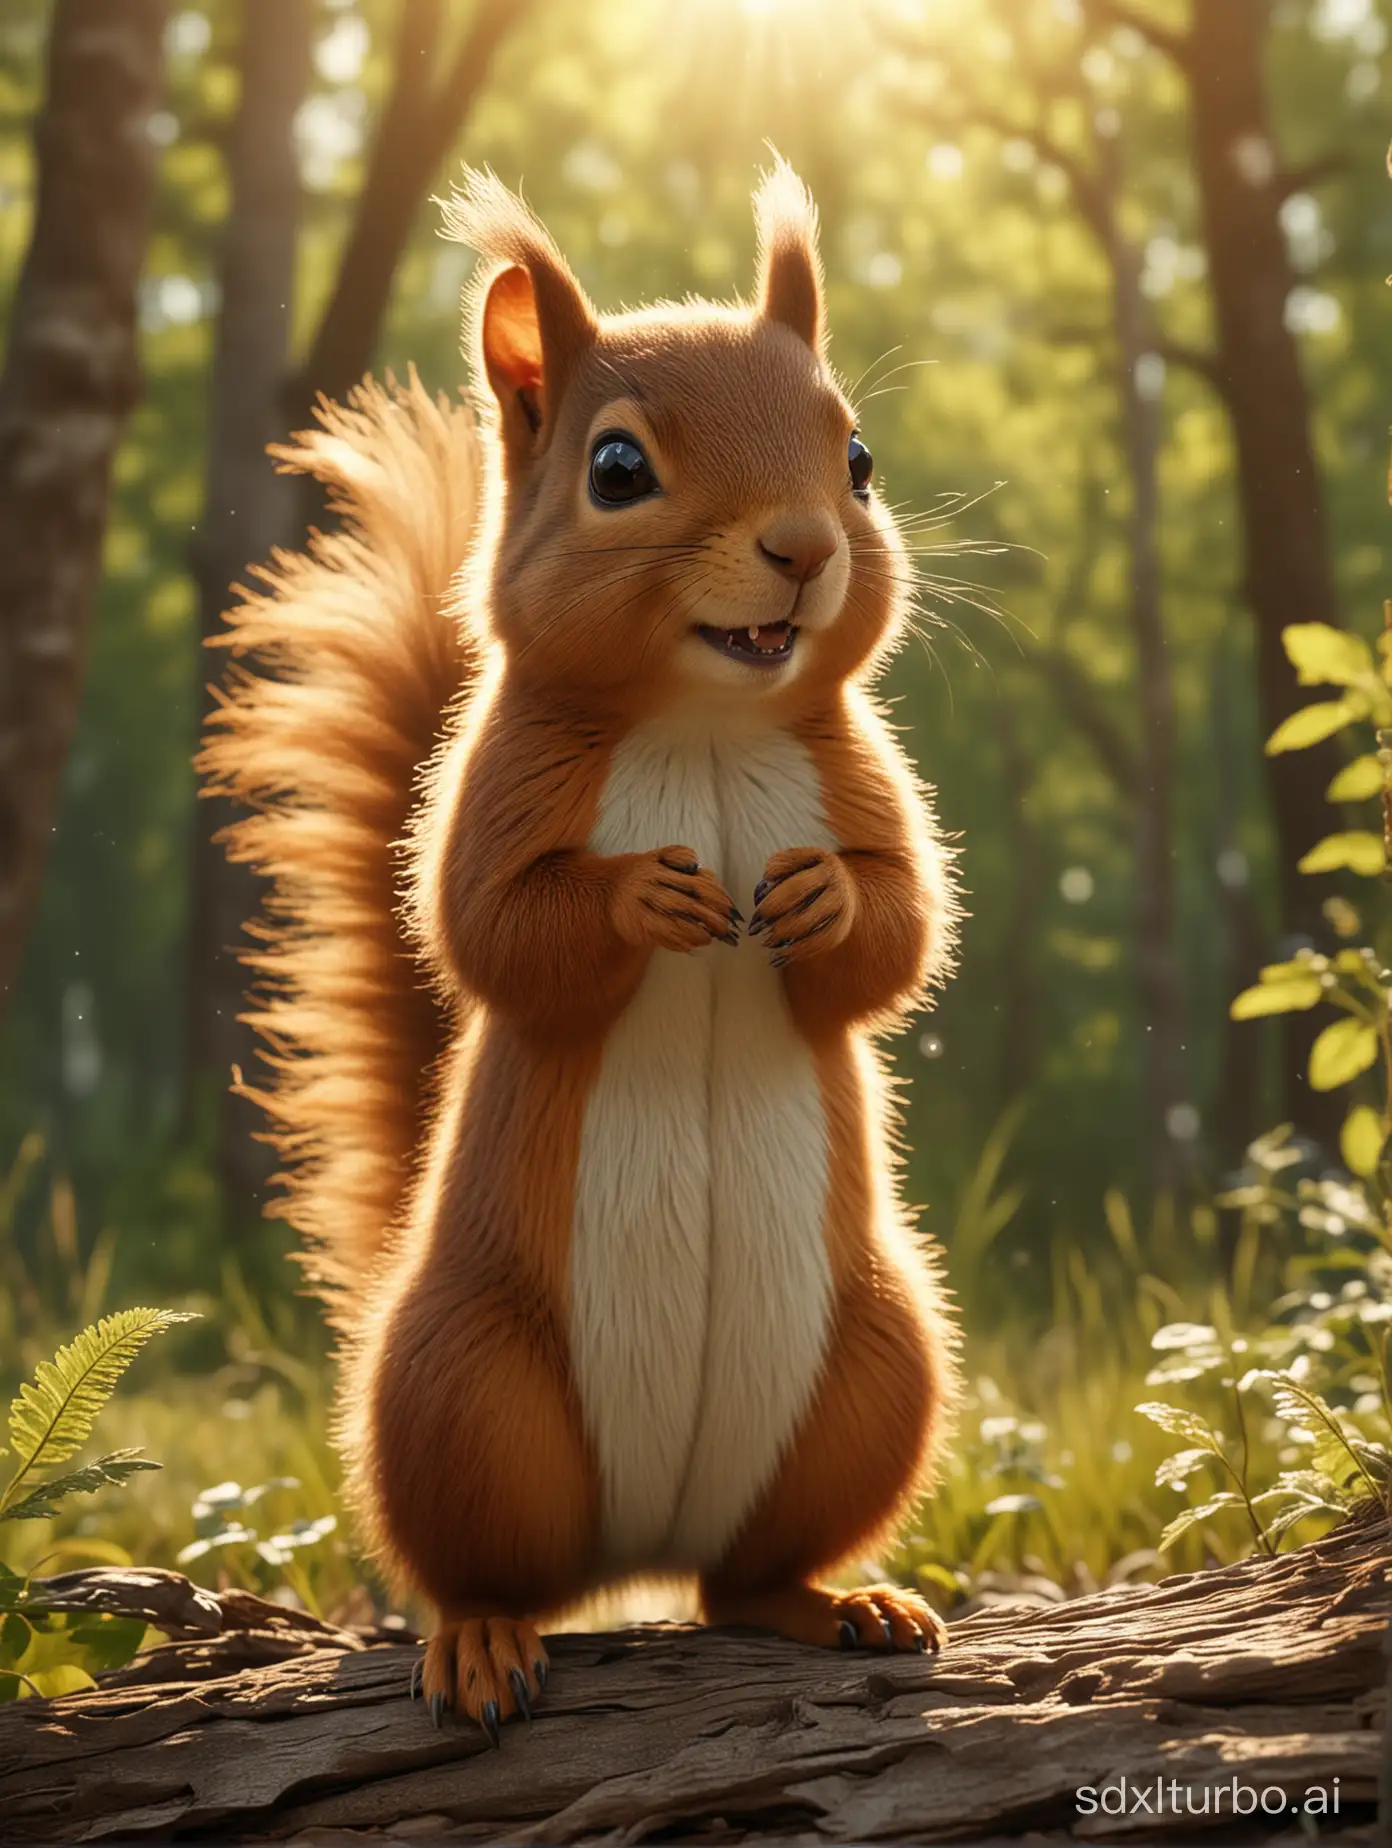 3D rendering, summer, a squirrel standing in the forest, brown fur, tears in its eyes, looking pitifully, (prairie background), small body, dappled sunlight, cinematic effects, adding details,